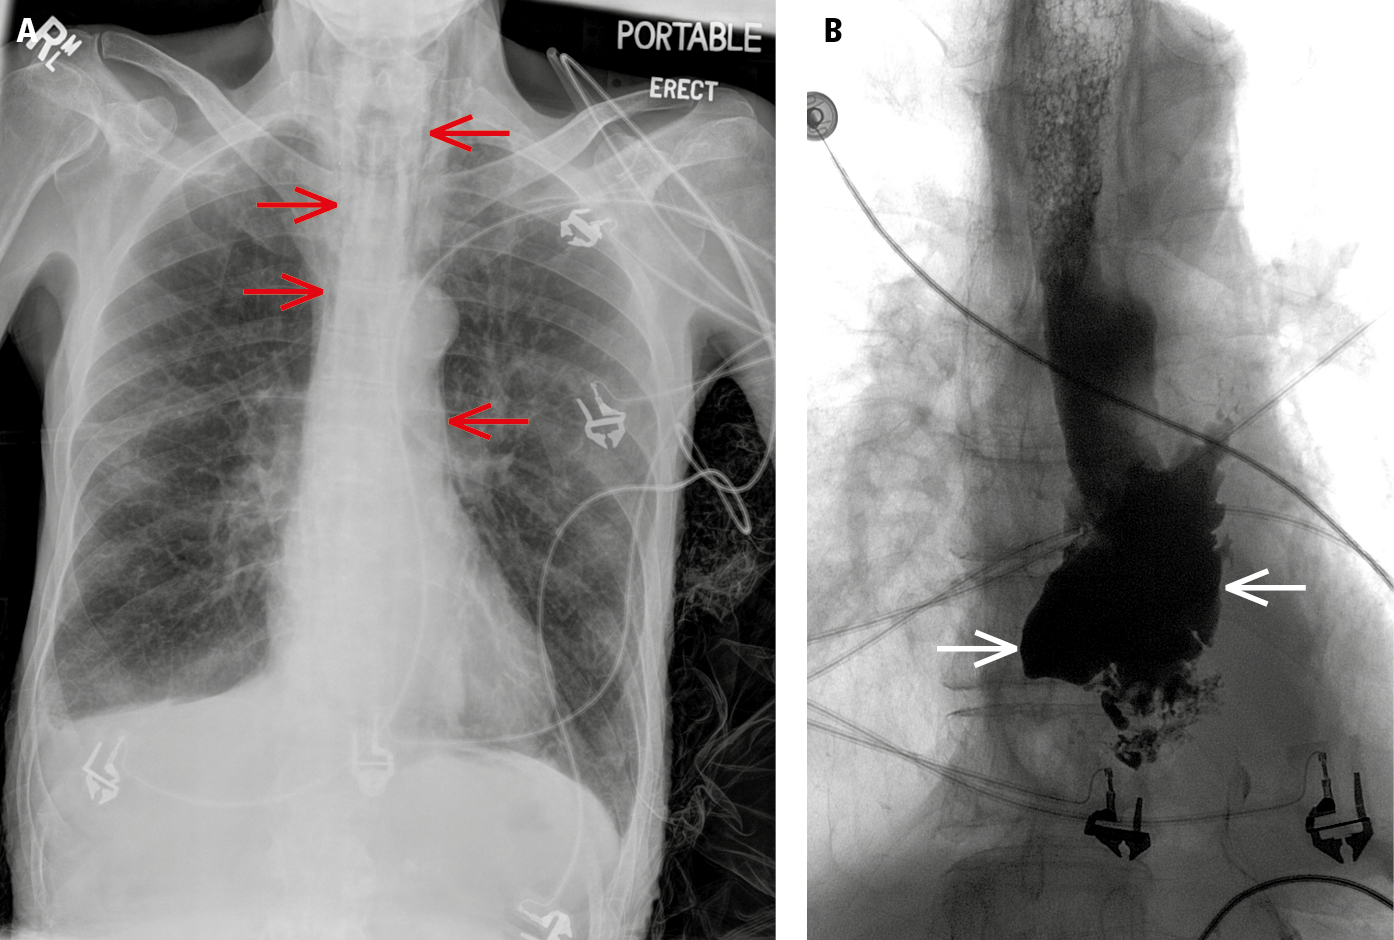 Figure 031_6871.  Chest radiography ( A ) shows pneumomediastinum (red arrows) along the paratracheal soft tissues and aorta. Contrast esophagography ( B ) reveals contrast leakage from the esophagus (white arrows), indicating pneumomediastinum secondary to esophageal rupture. 